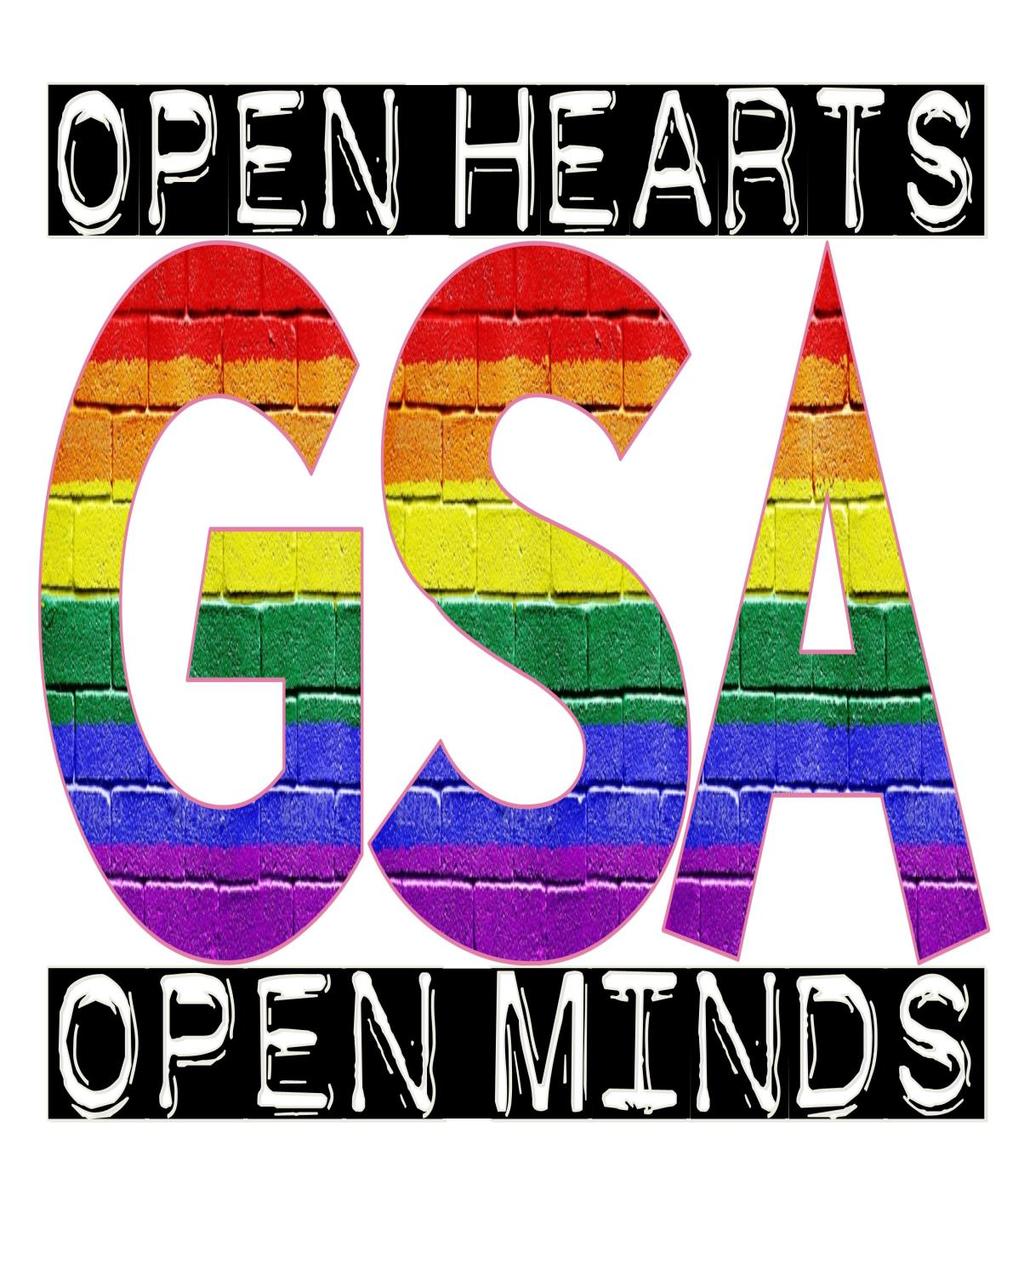 GSA will be meeting on Thursday, November 15 Topic: GSA Annual Project